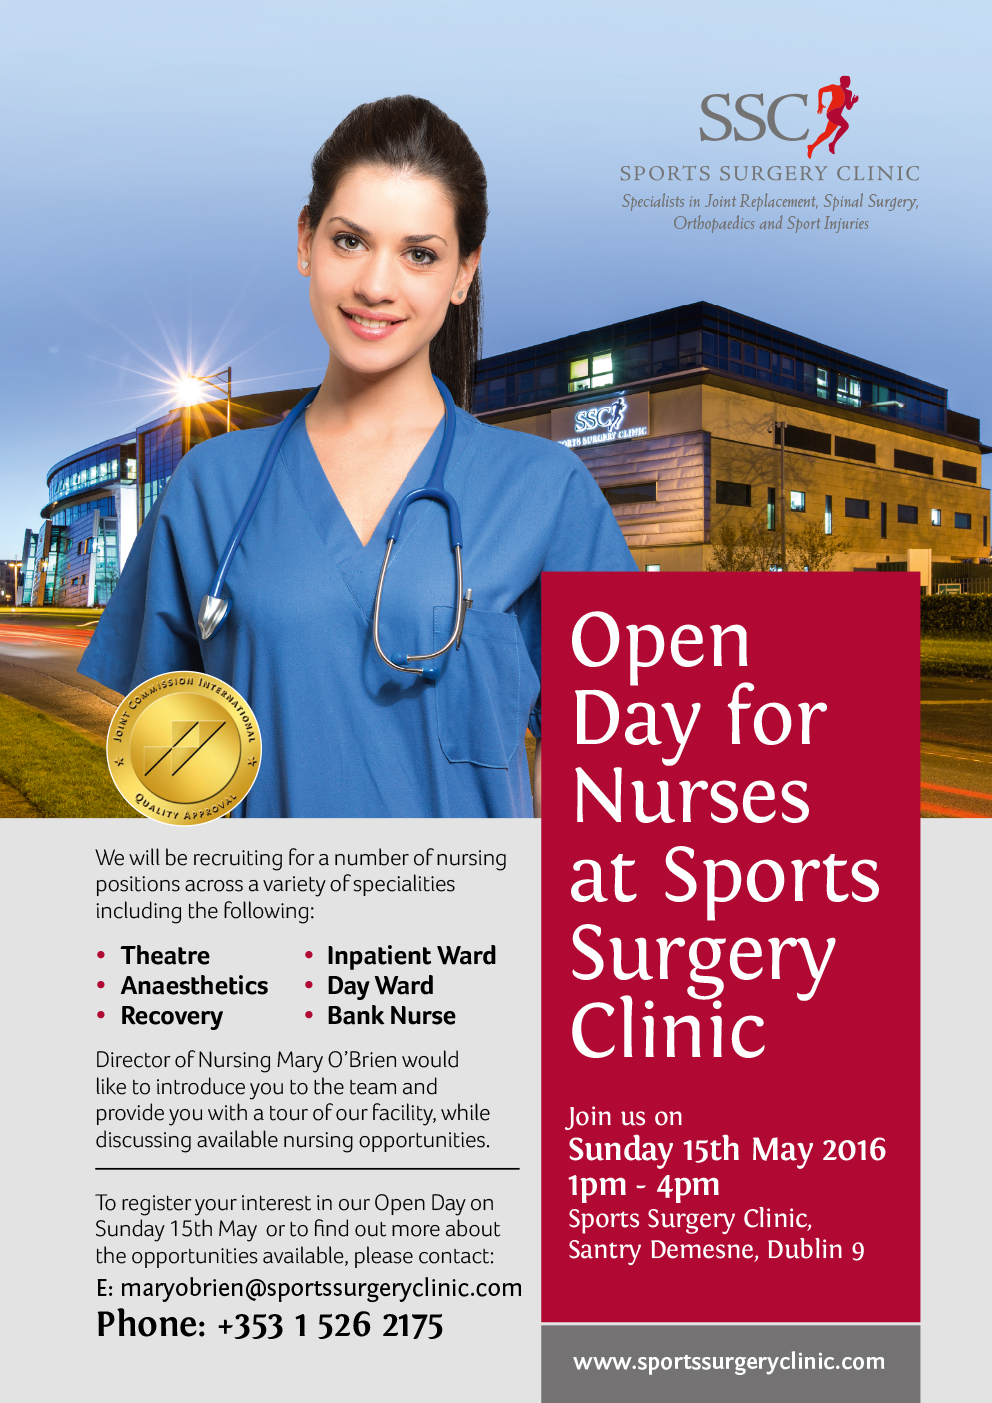 Open Day for Nurses at Sports Surgery Clinic